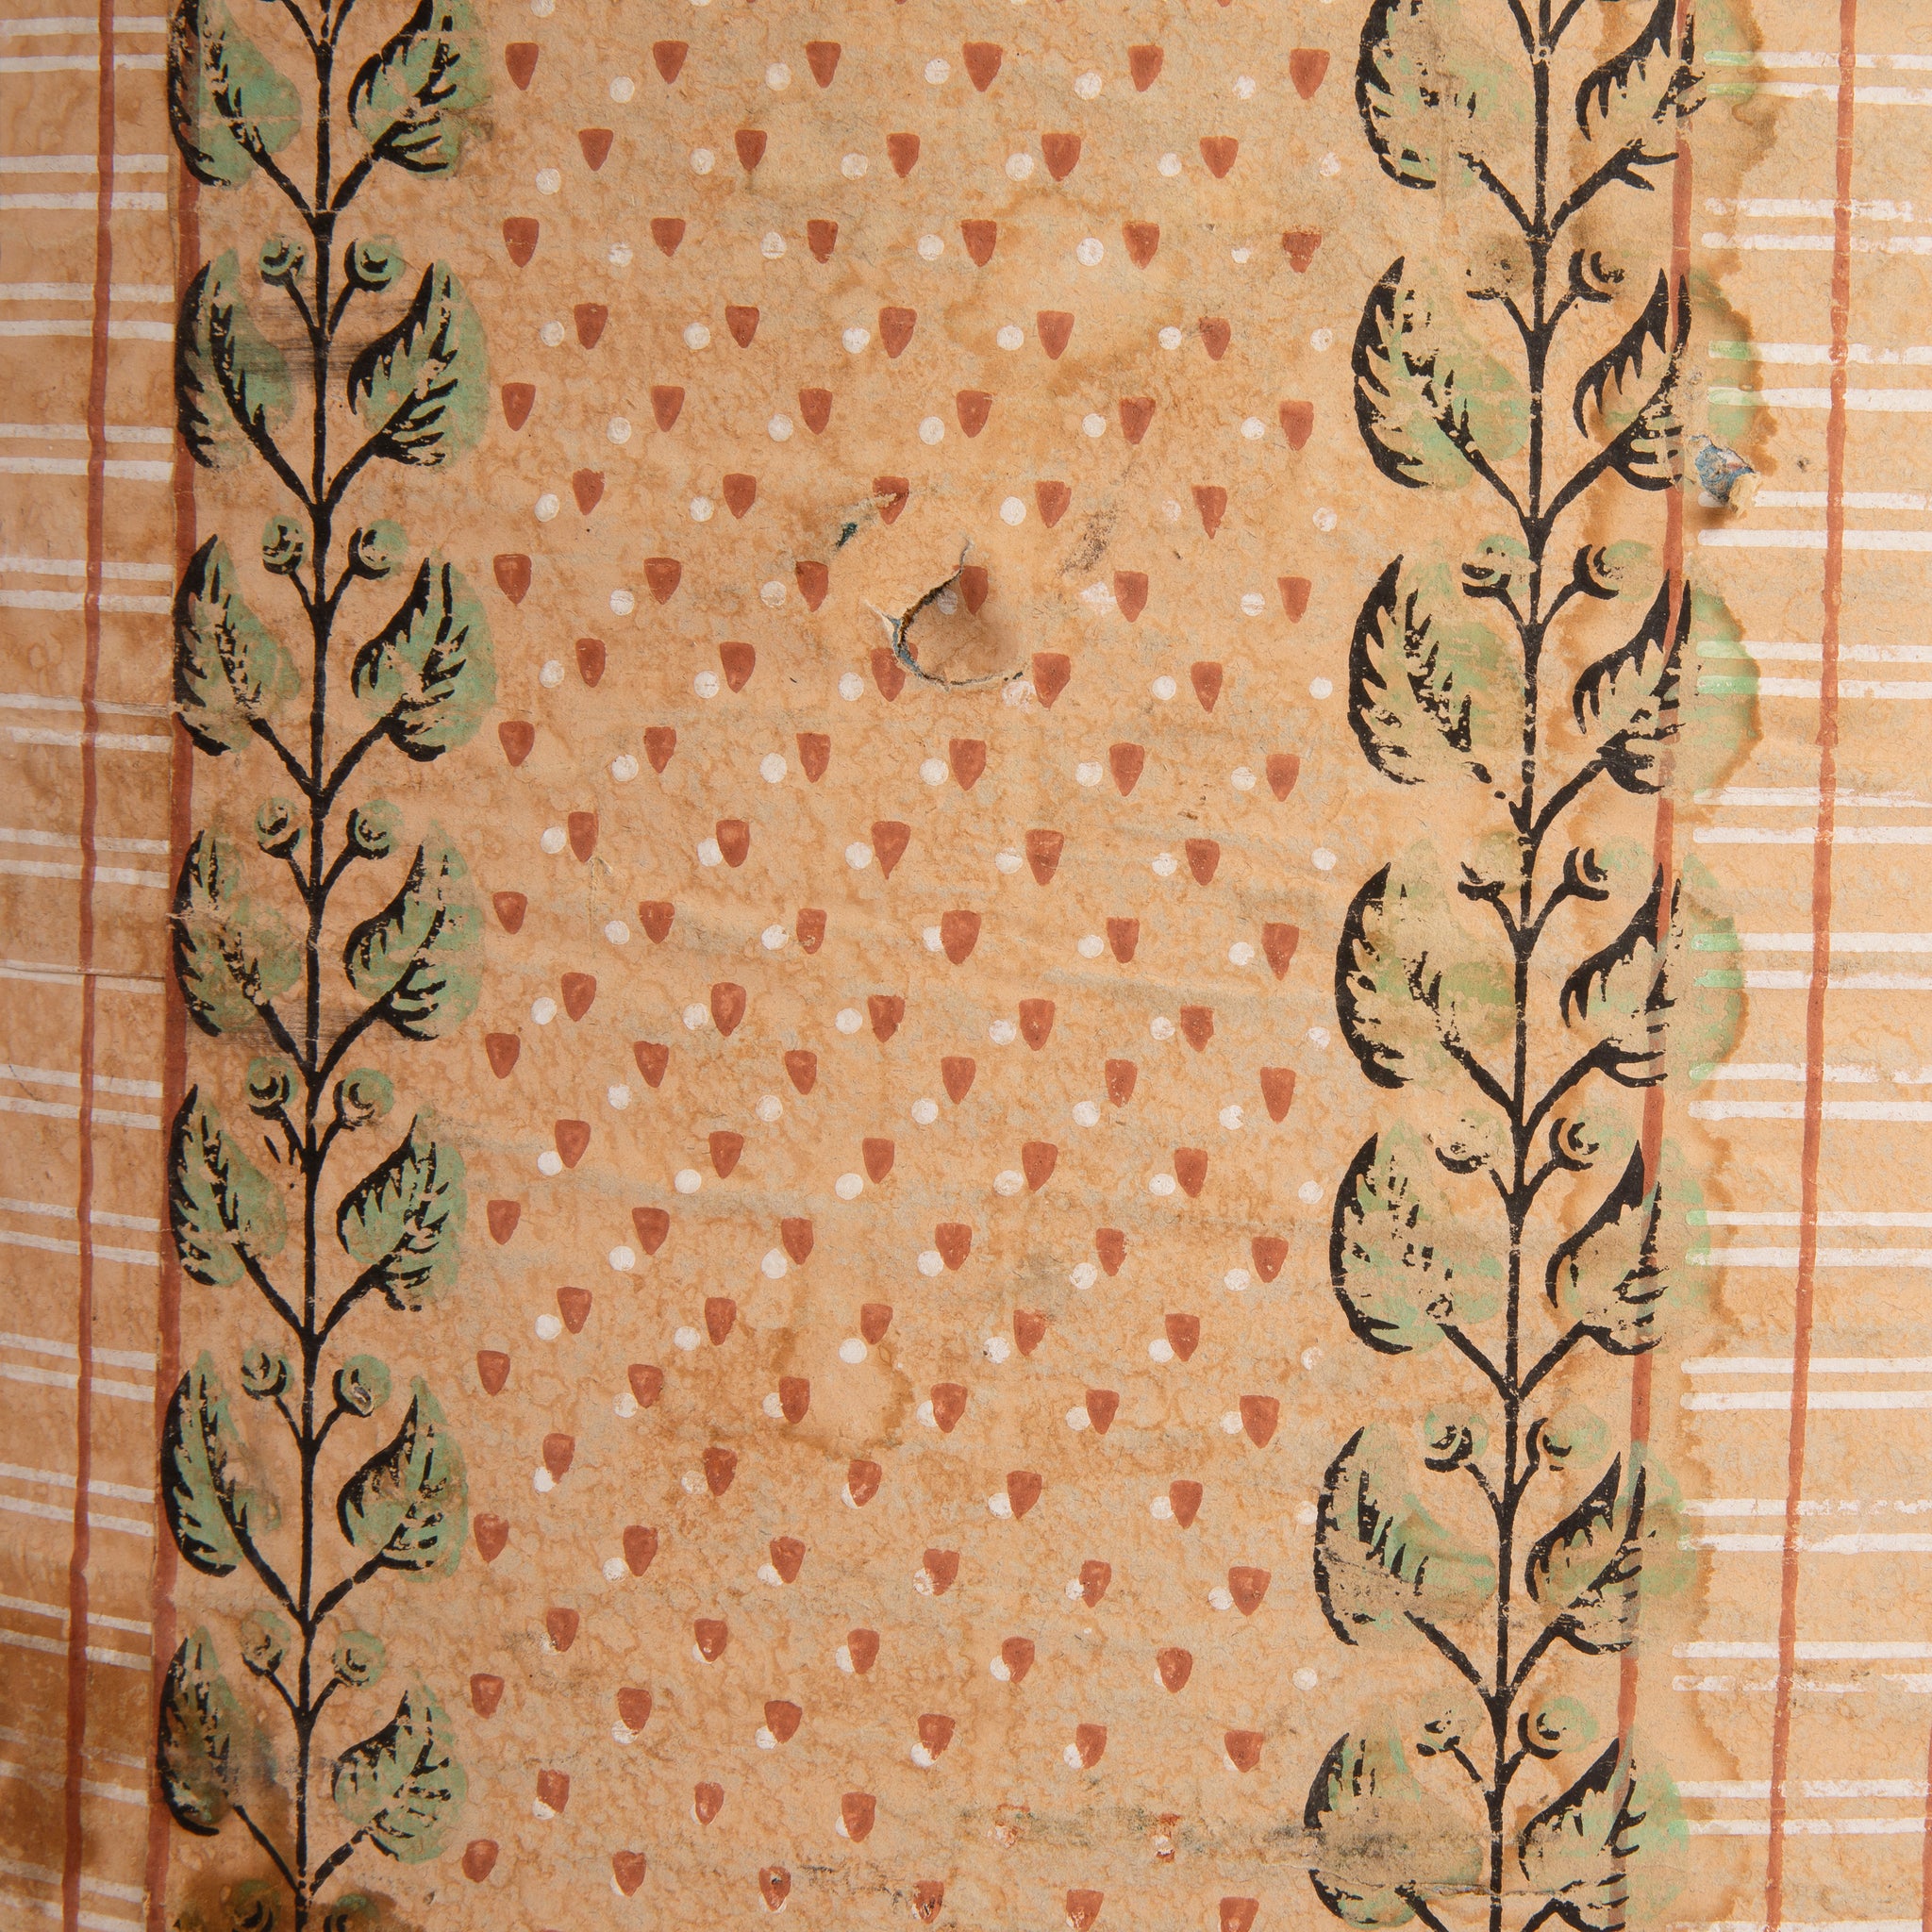 ANTIQUE COVERED WALLPAPER BOX